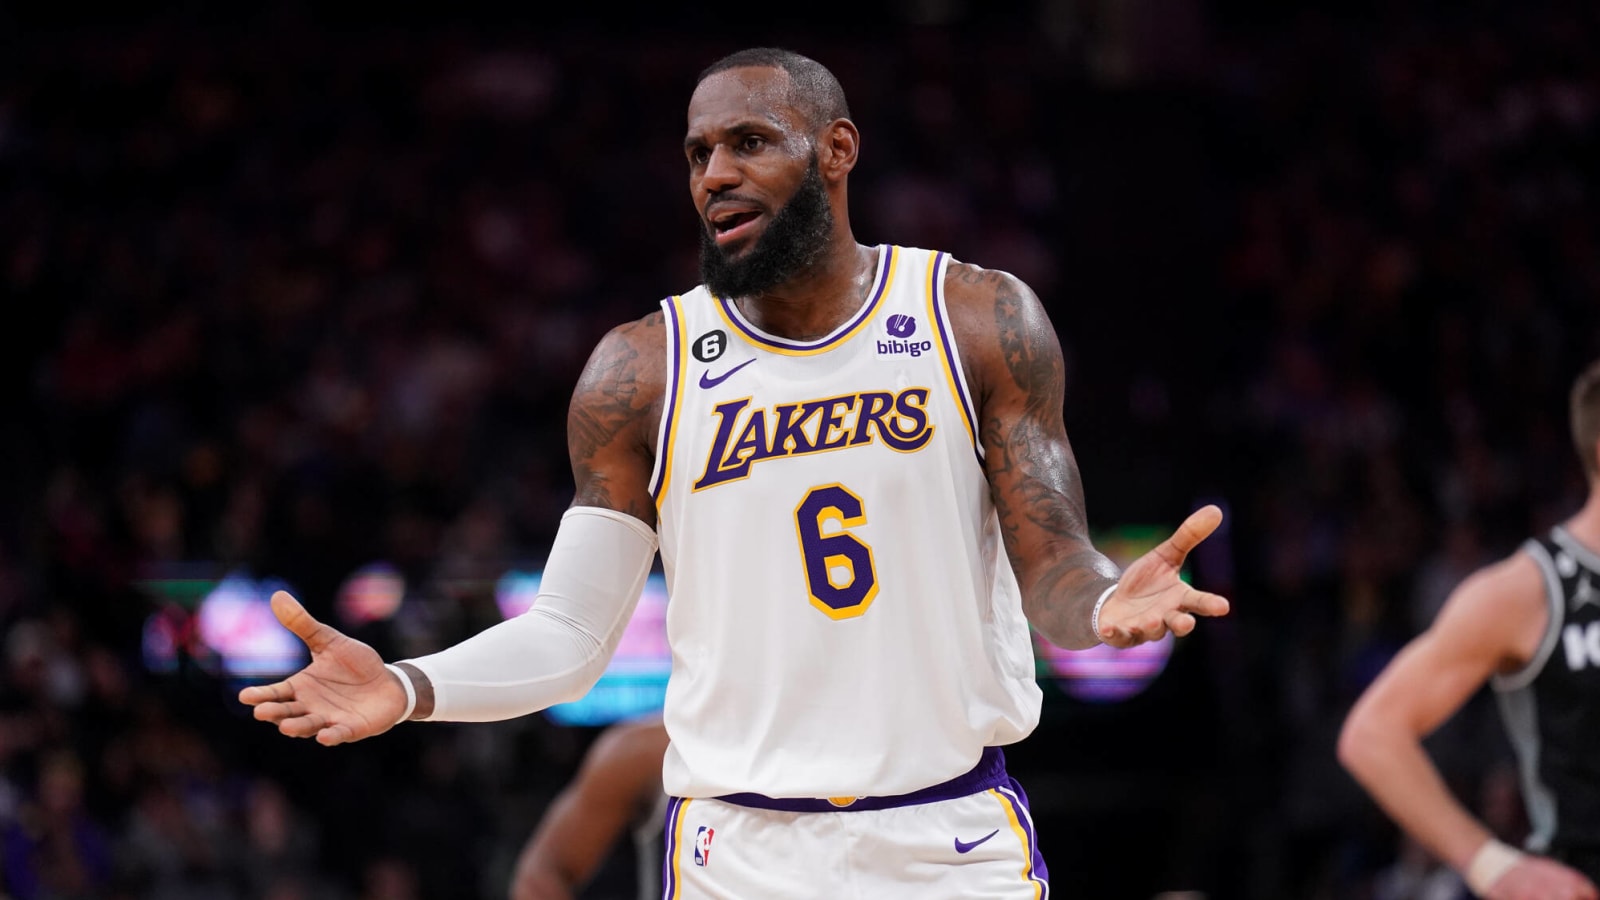 Insider: NBA executives 'prepared' for Lakers to trade LeBron James